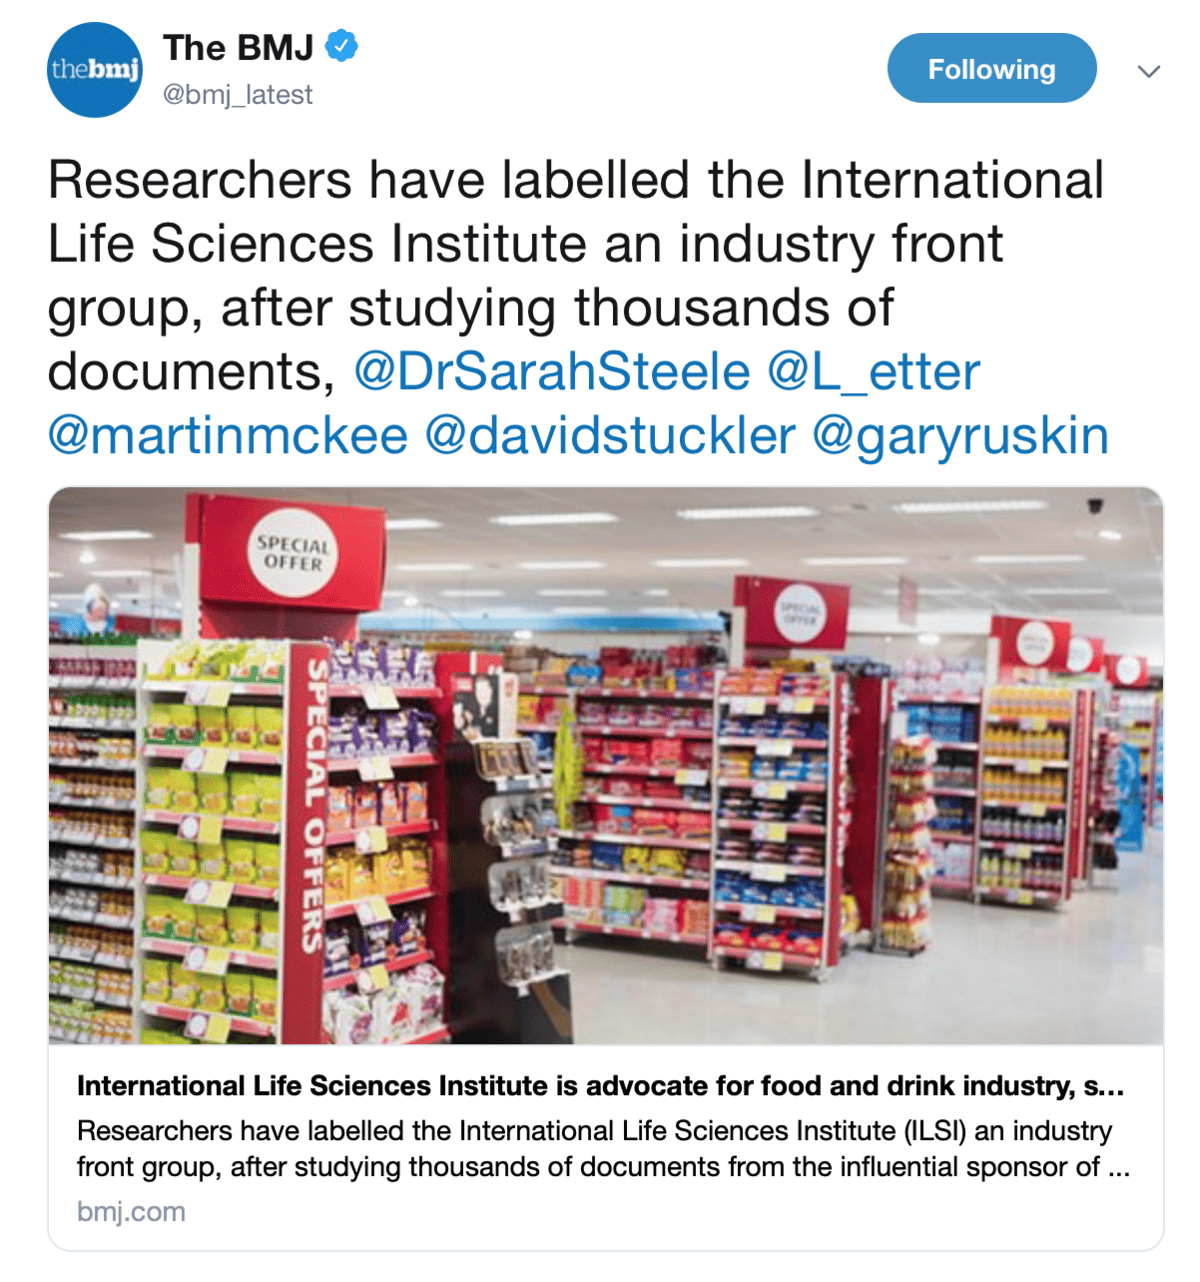 International Life Sciences Institute (ILSI) is a Food Industry Lobby Group